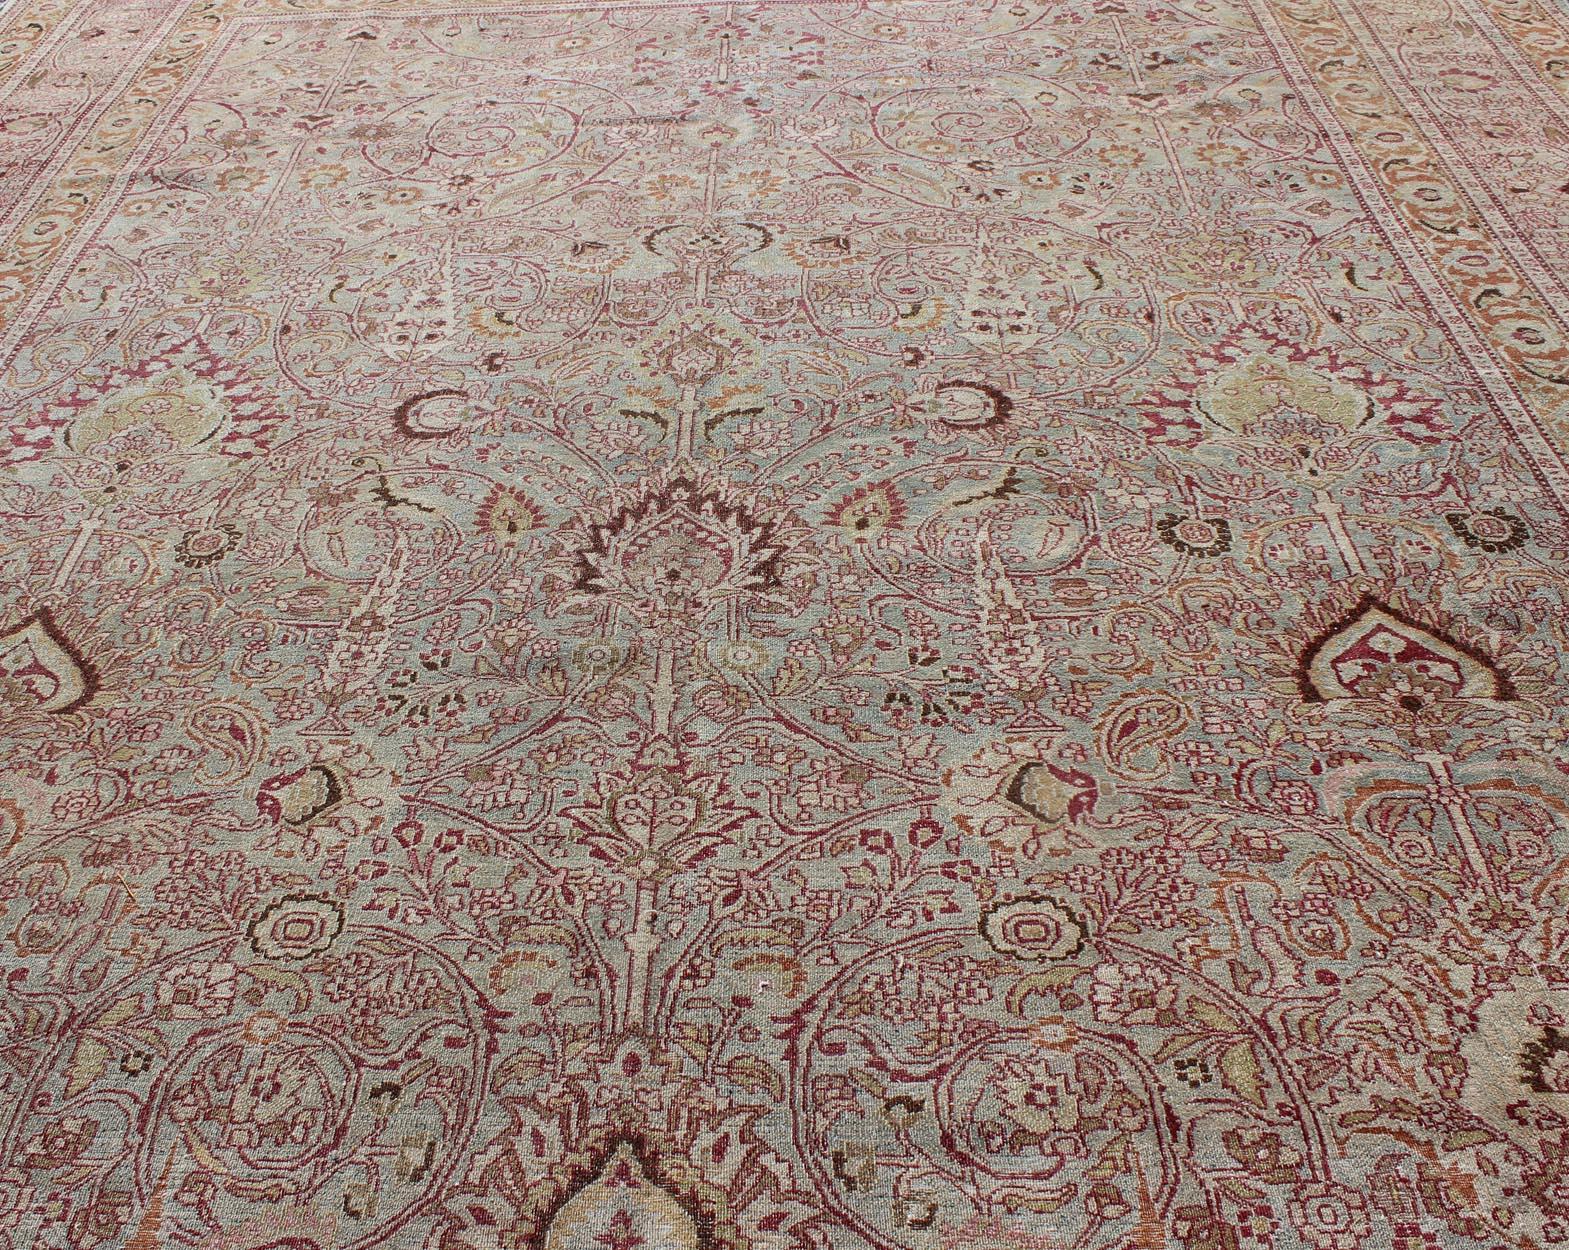 Antique Persian Khorassan Rug with All-Over Floral Design in Orange, Red, Pink For Sale 3